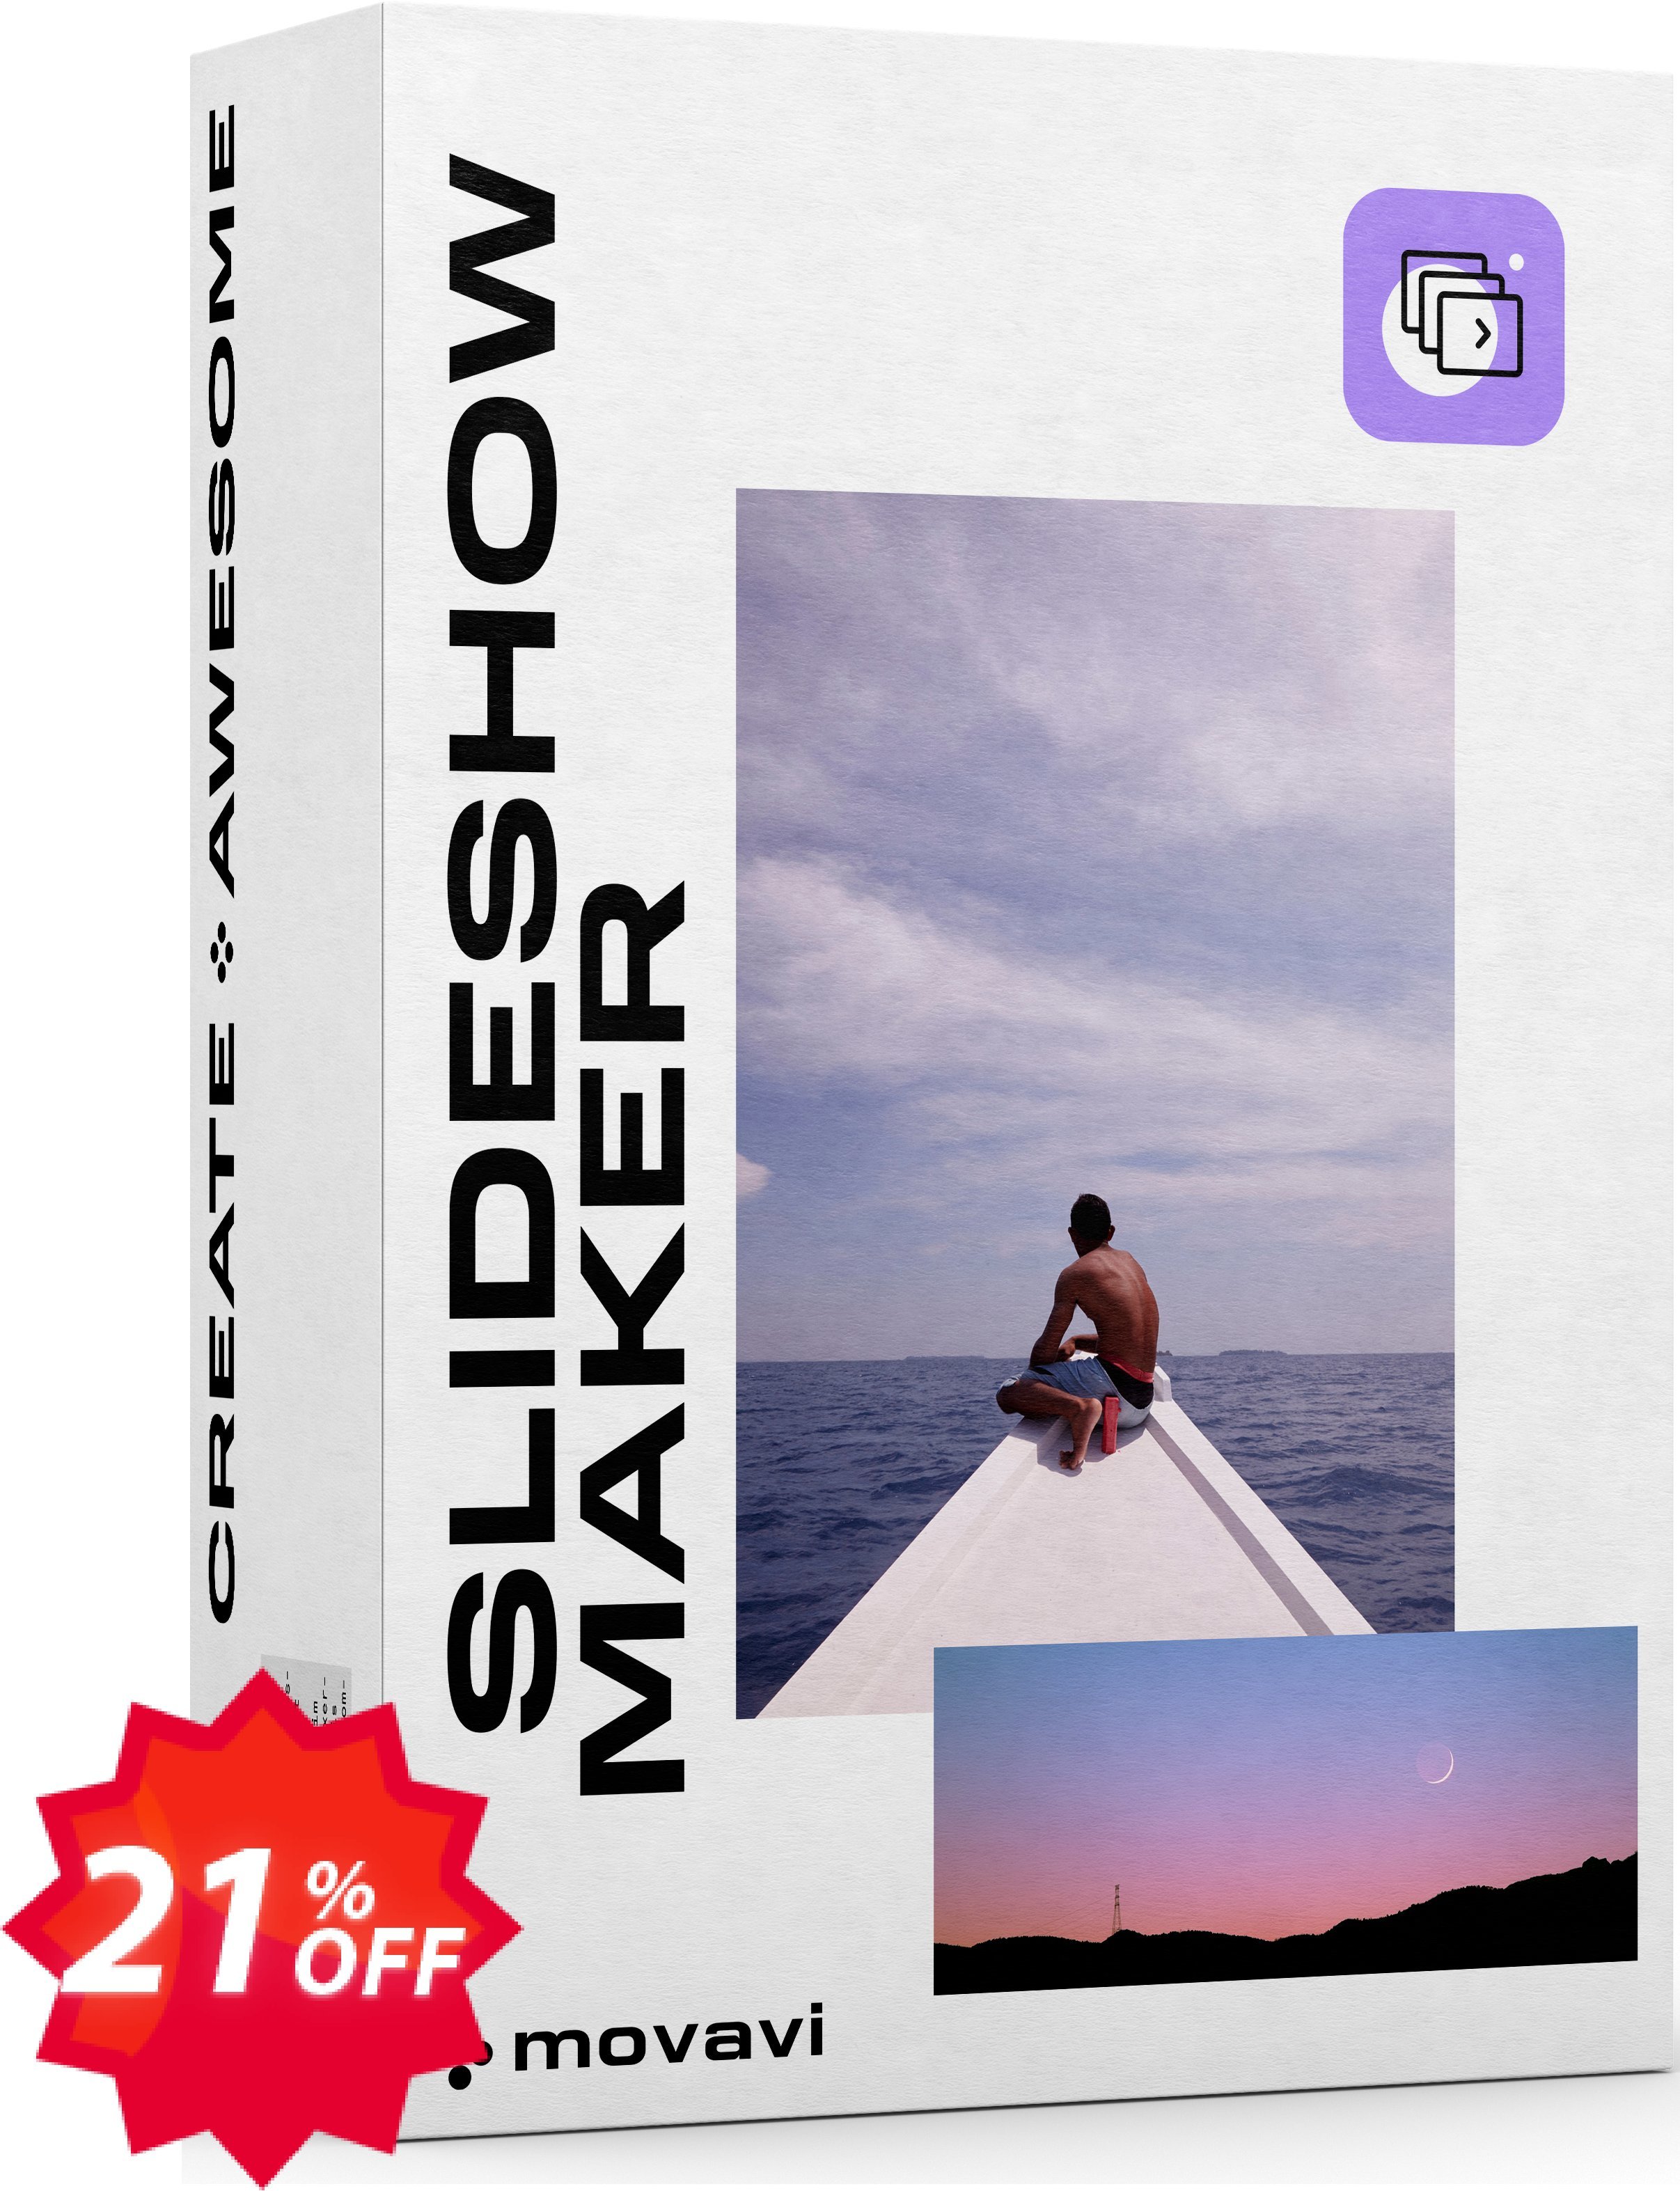 Movavi SlideShow Maker for Business – Yearly Subscription Coupon code 21% discount 